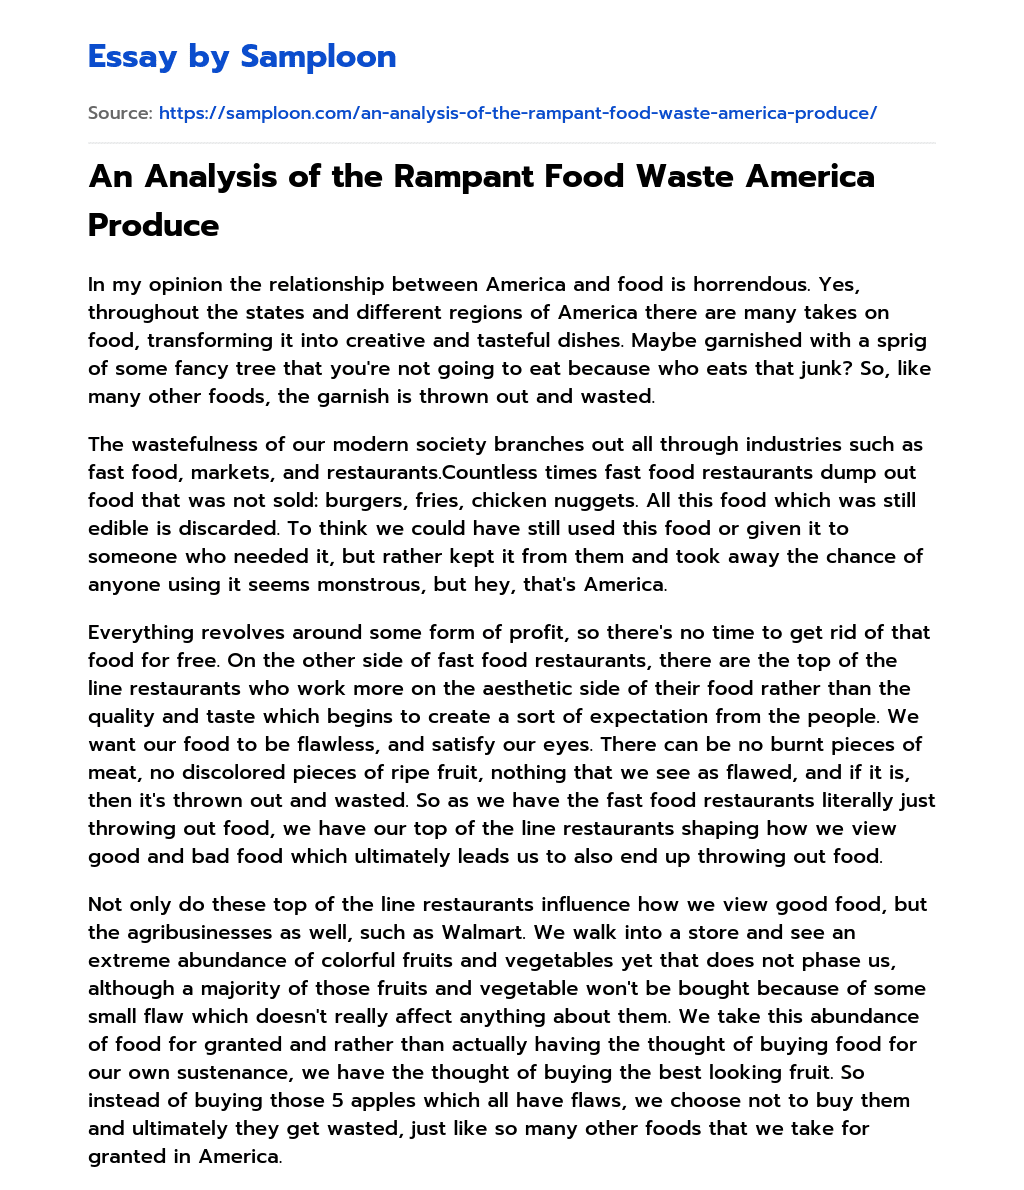 An Analysis of the Rampant Food Waste America Produce essay